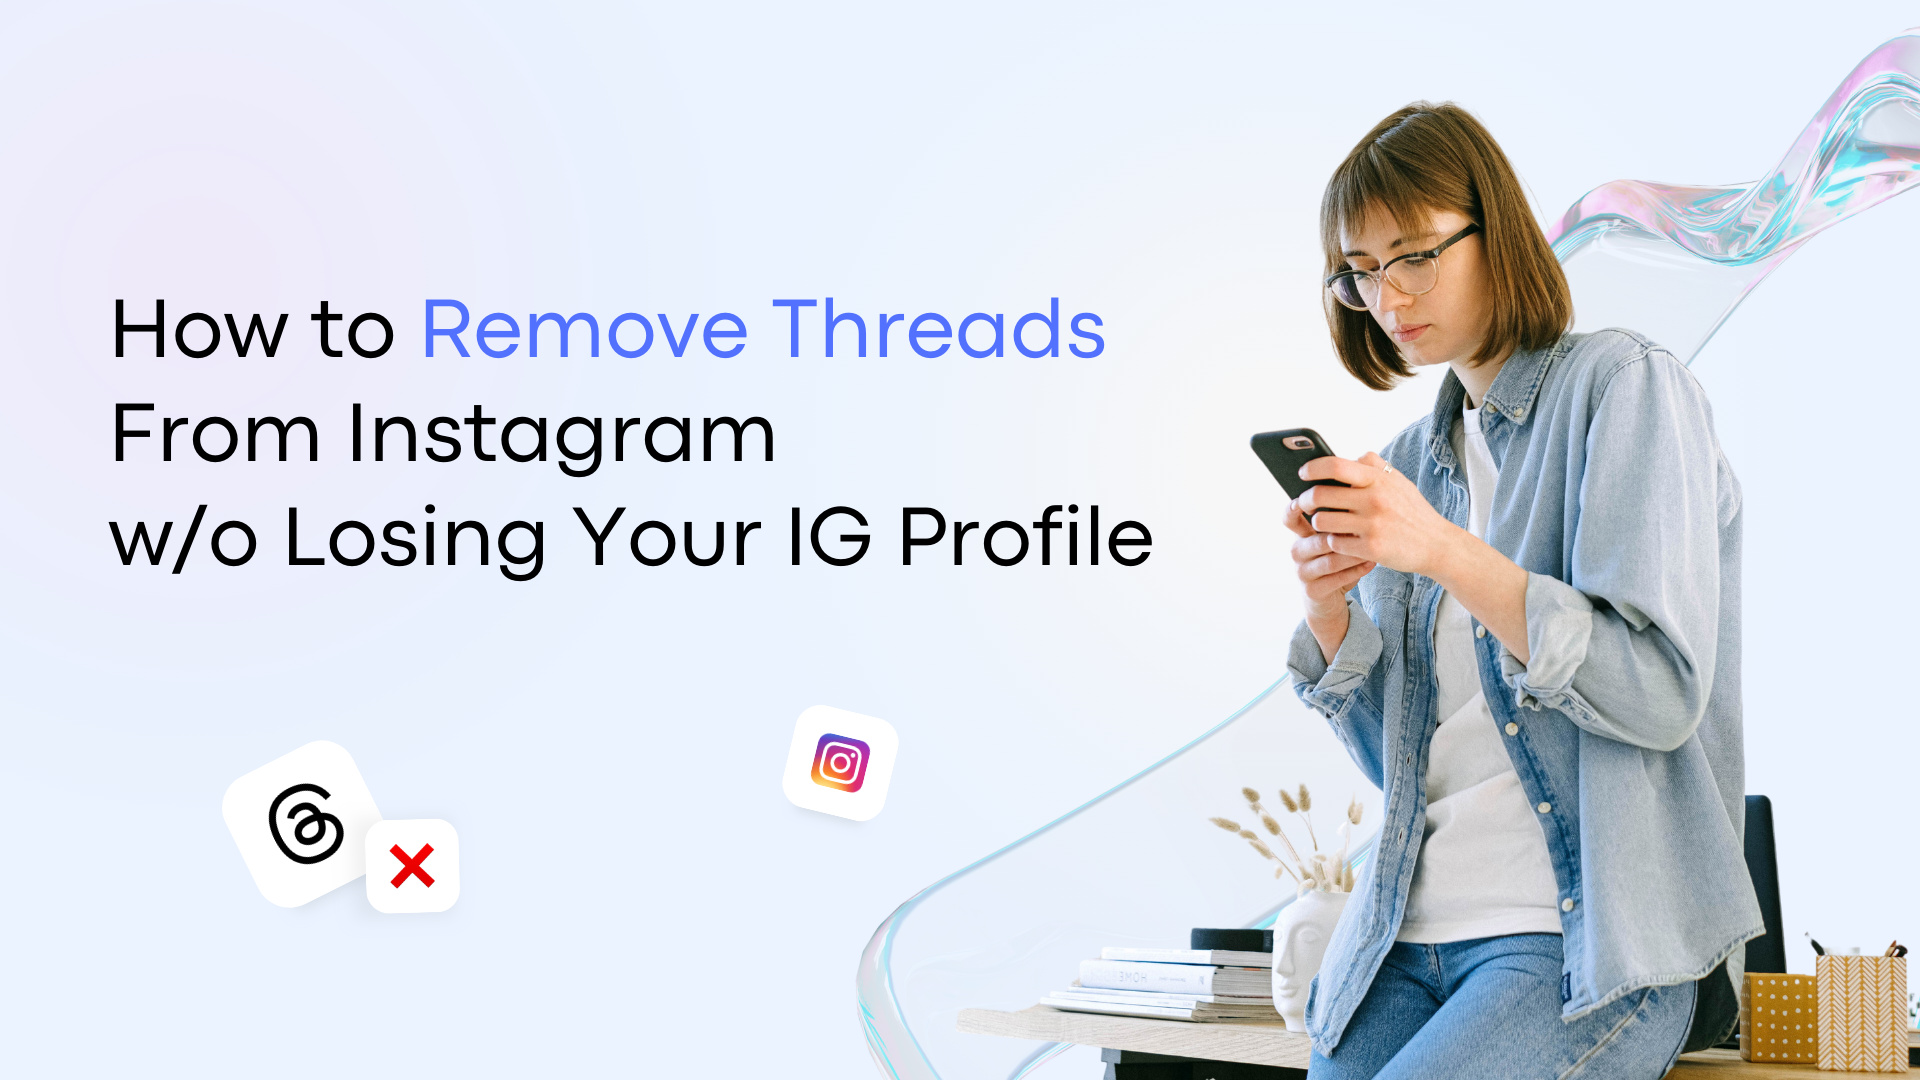 How to Remove Threads from Instagram Featured